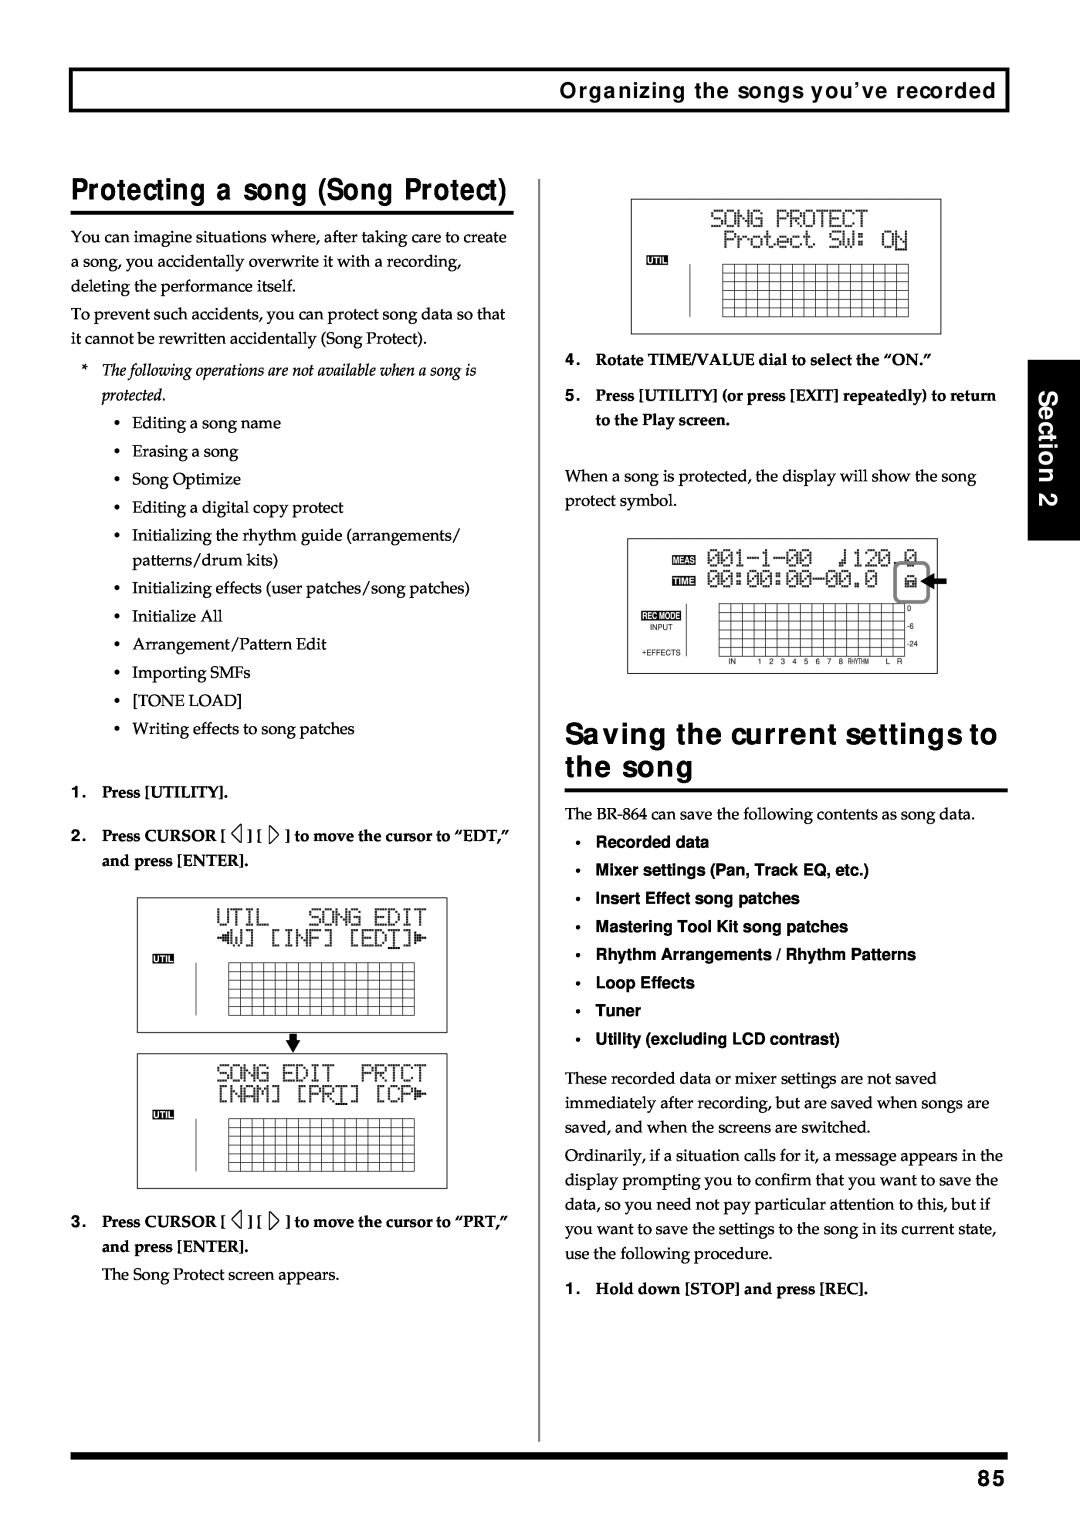 Roland BR-864 owner manual Protecting a song Song Protect, Saving the current settings to the song, Section 